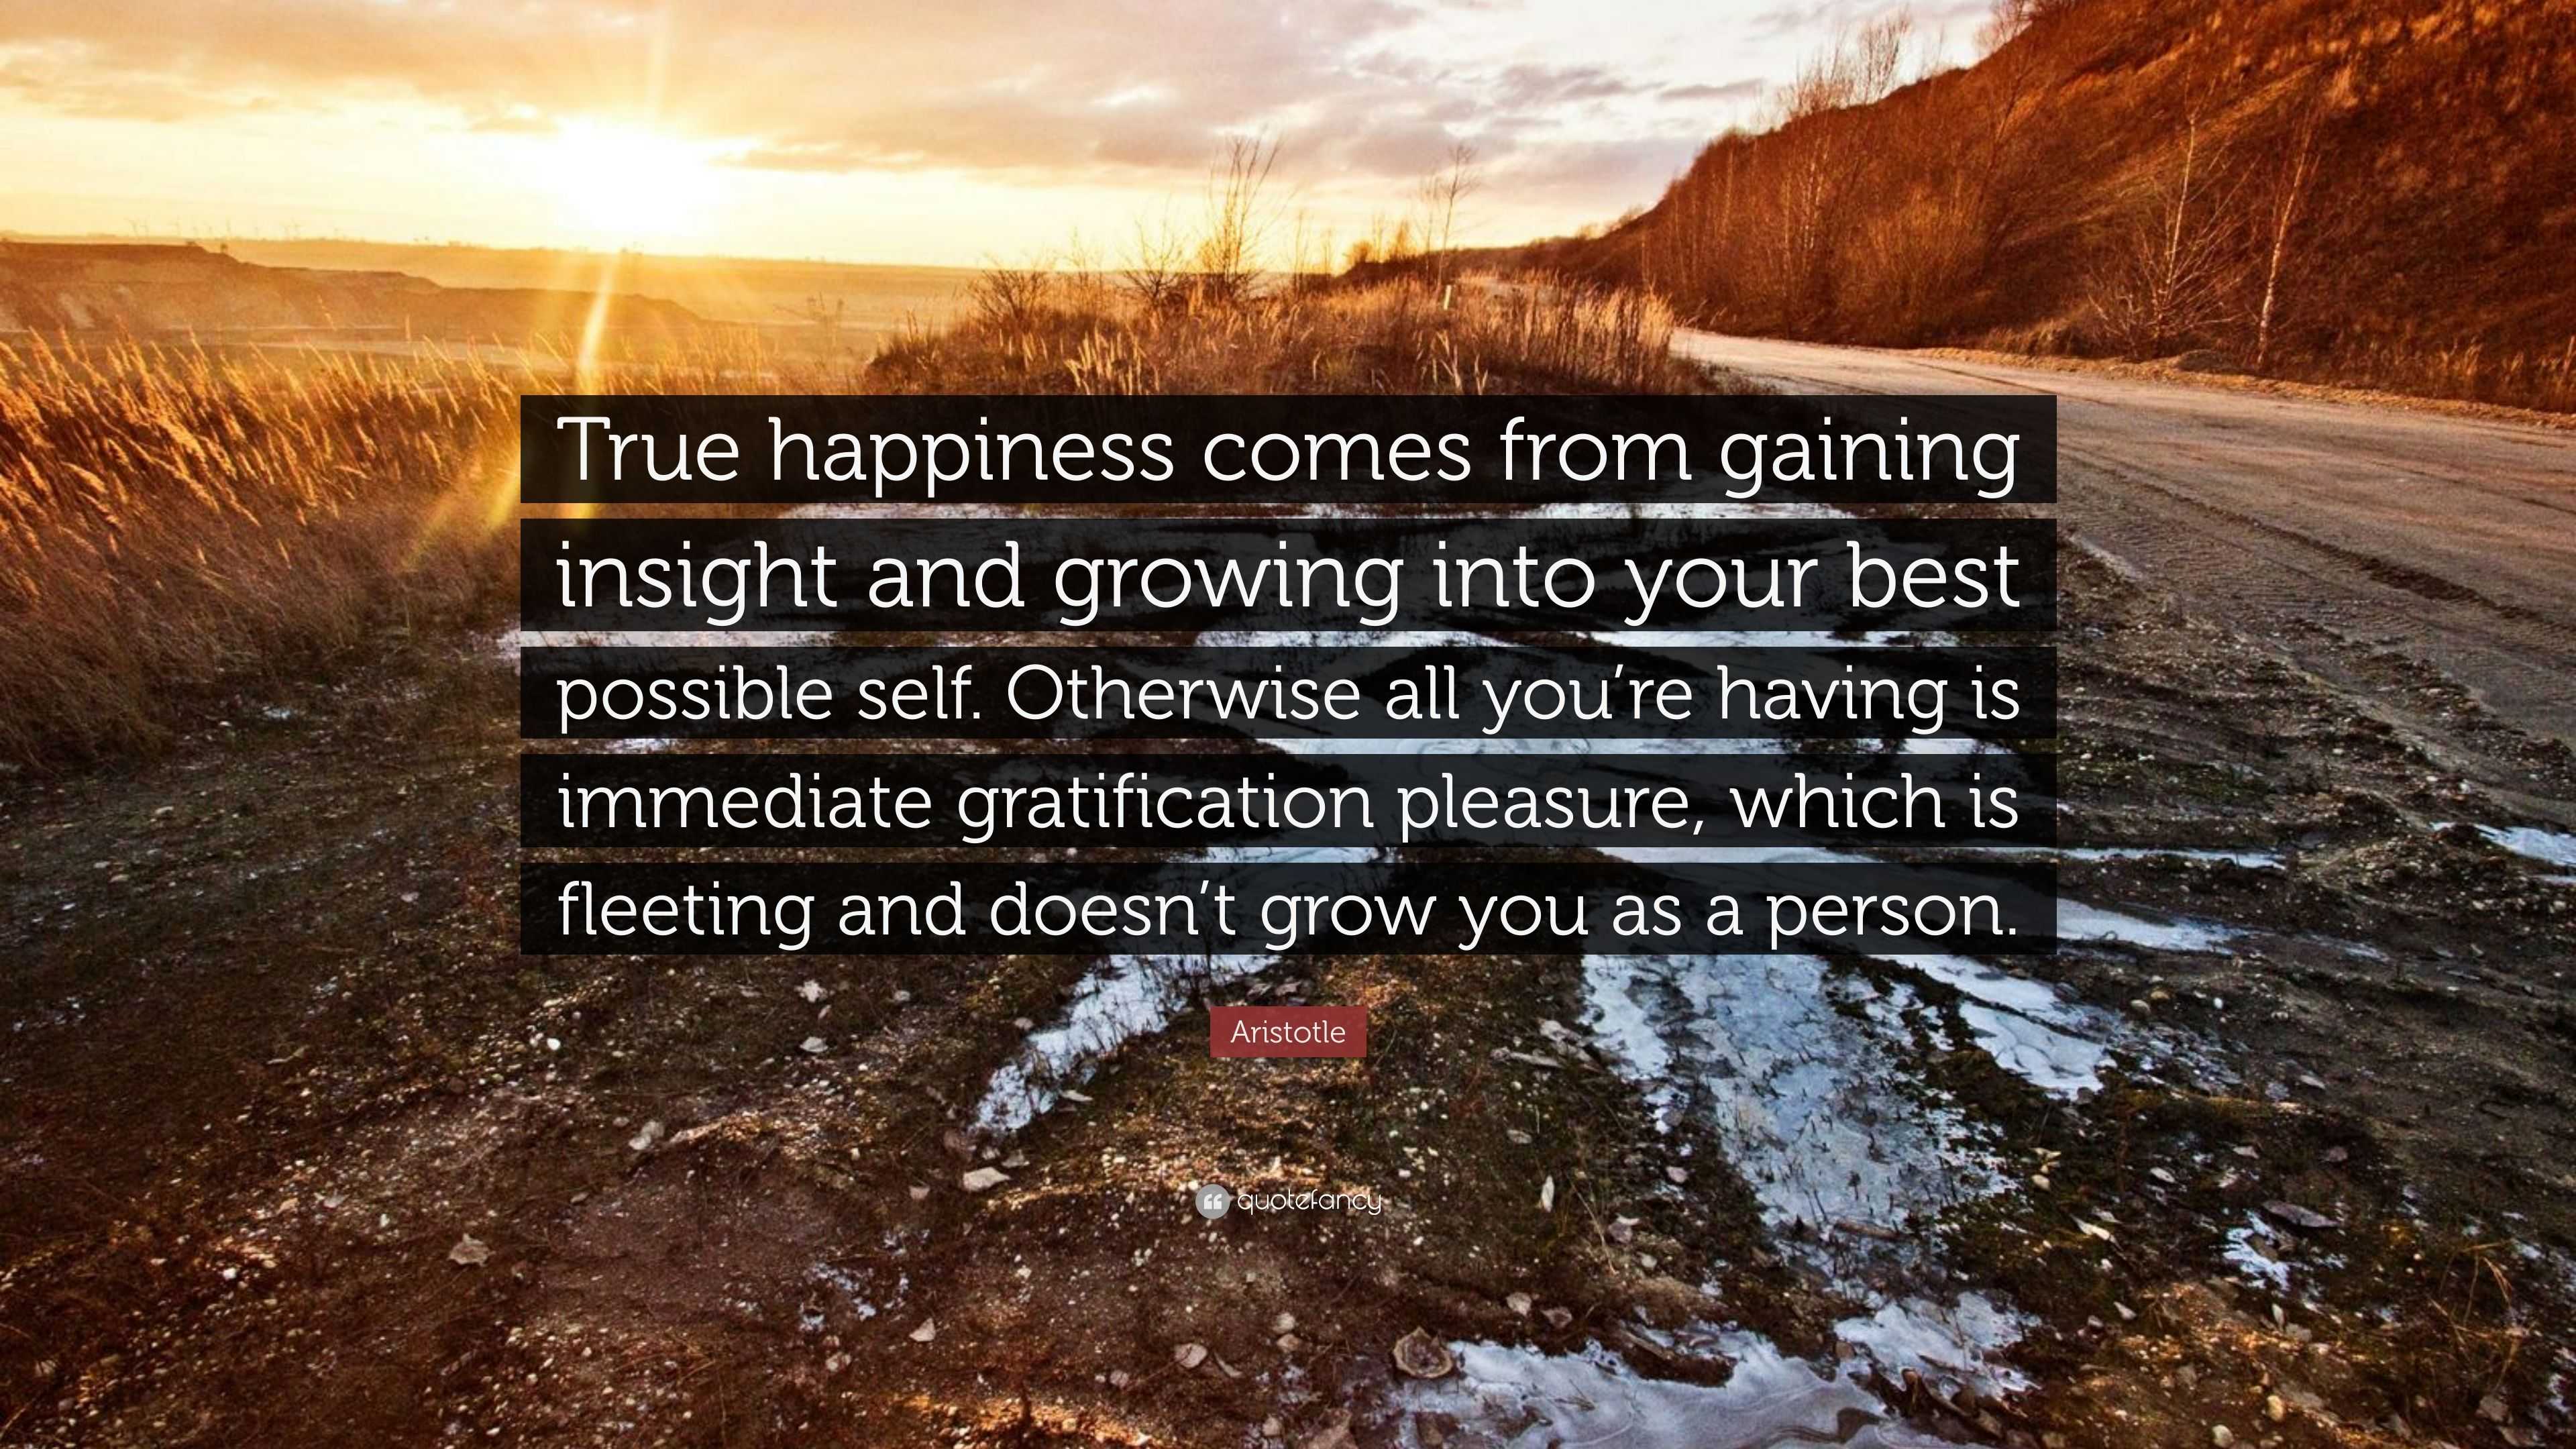 Aristotle Quote “True happiness comes from gaining